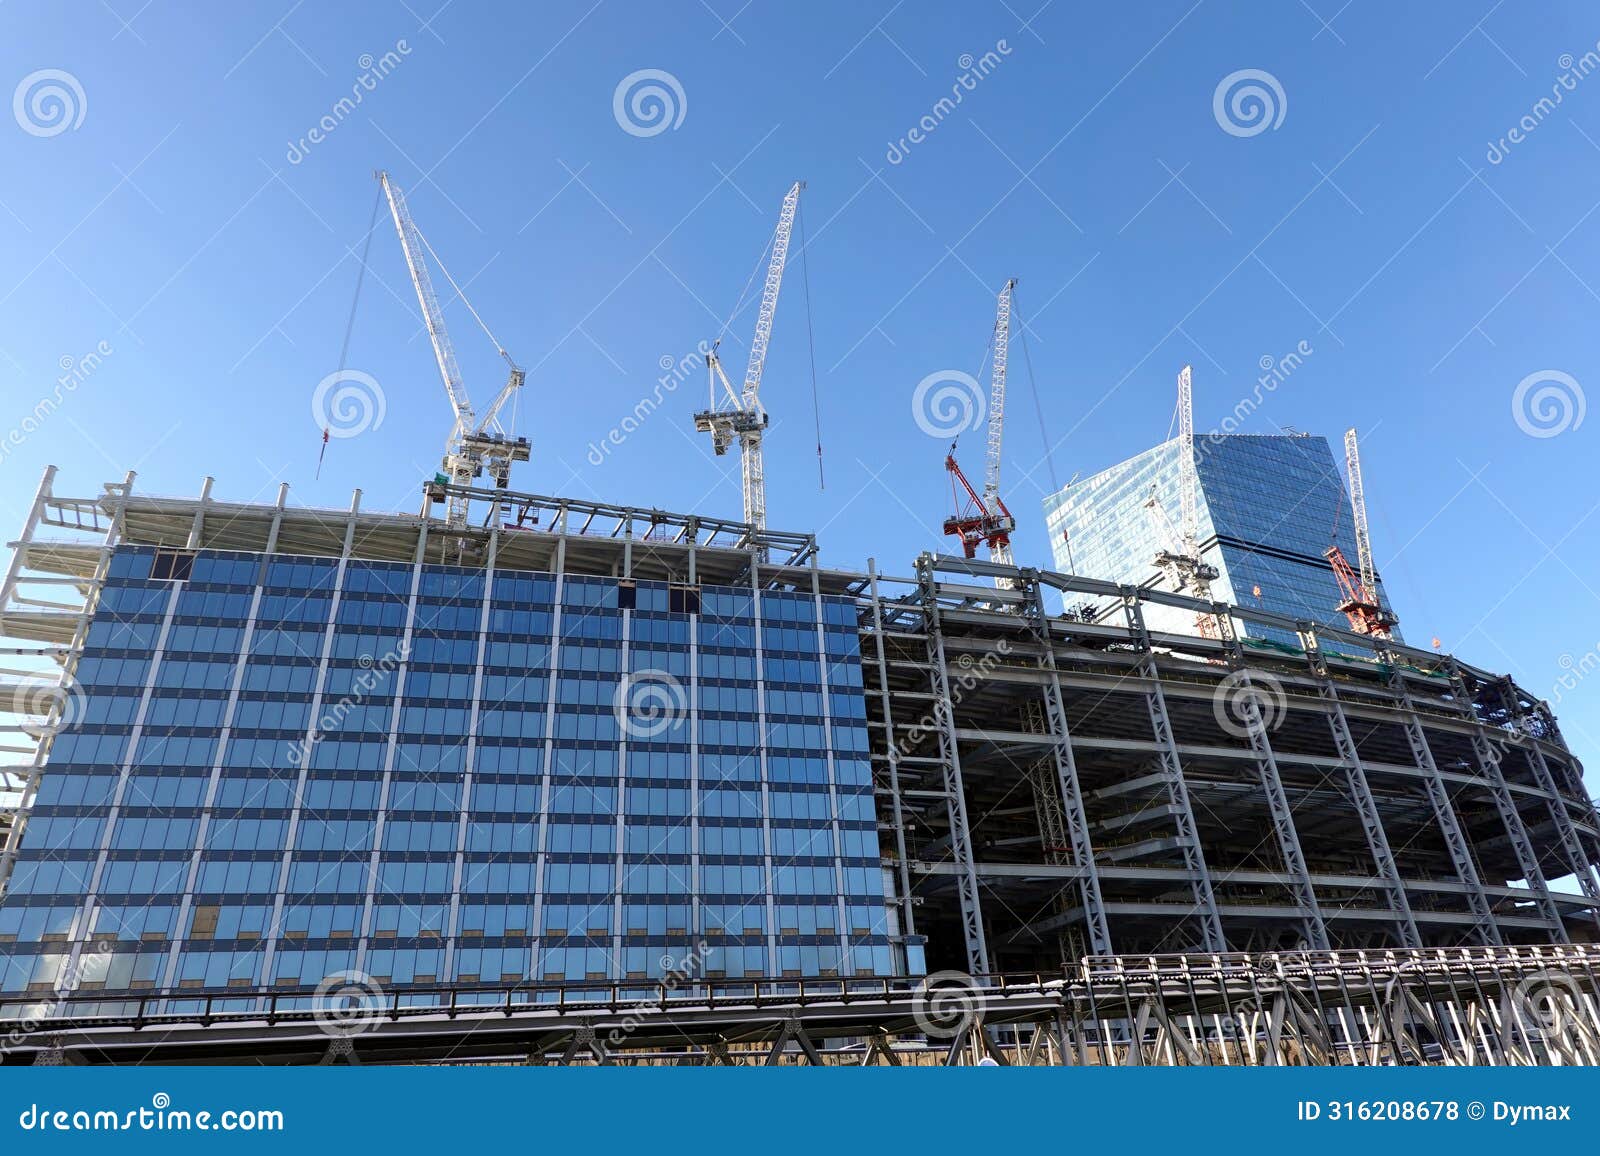 some tower cranes are building a modern tall skyscraper against clear cloudless blue sky